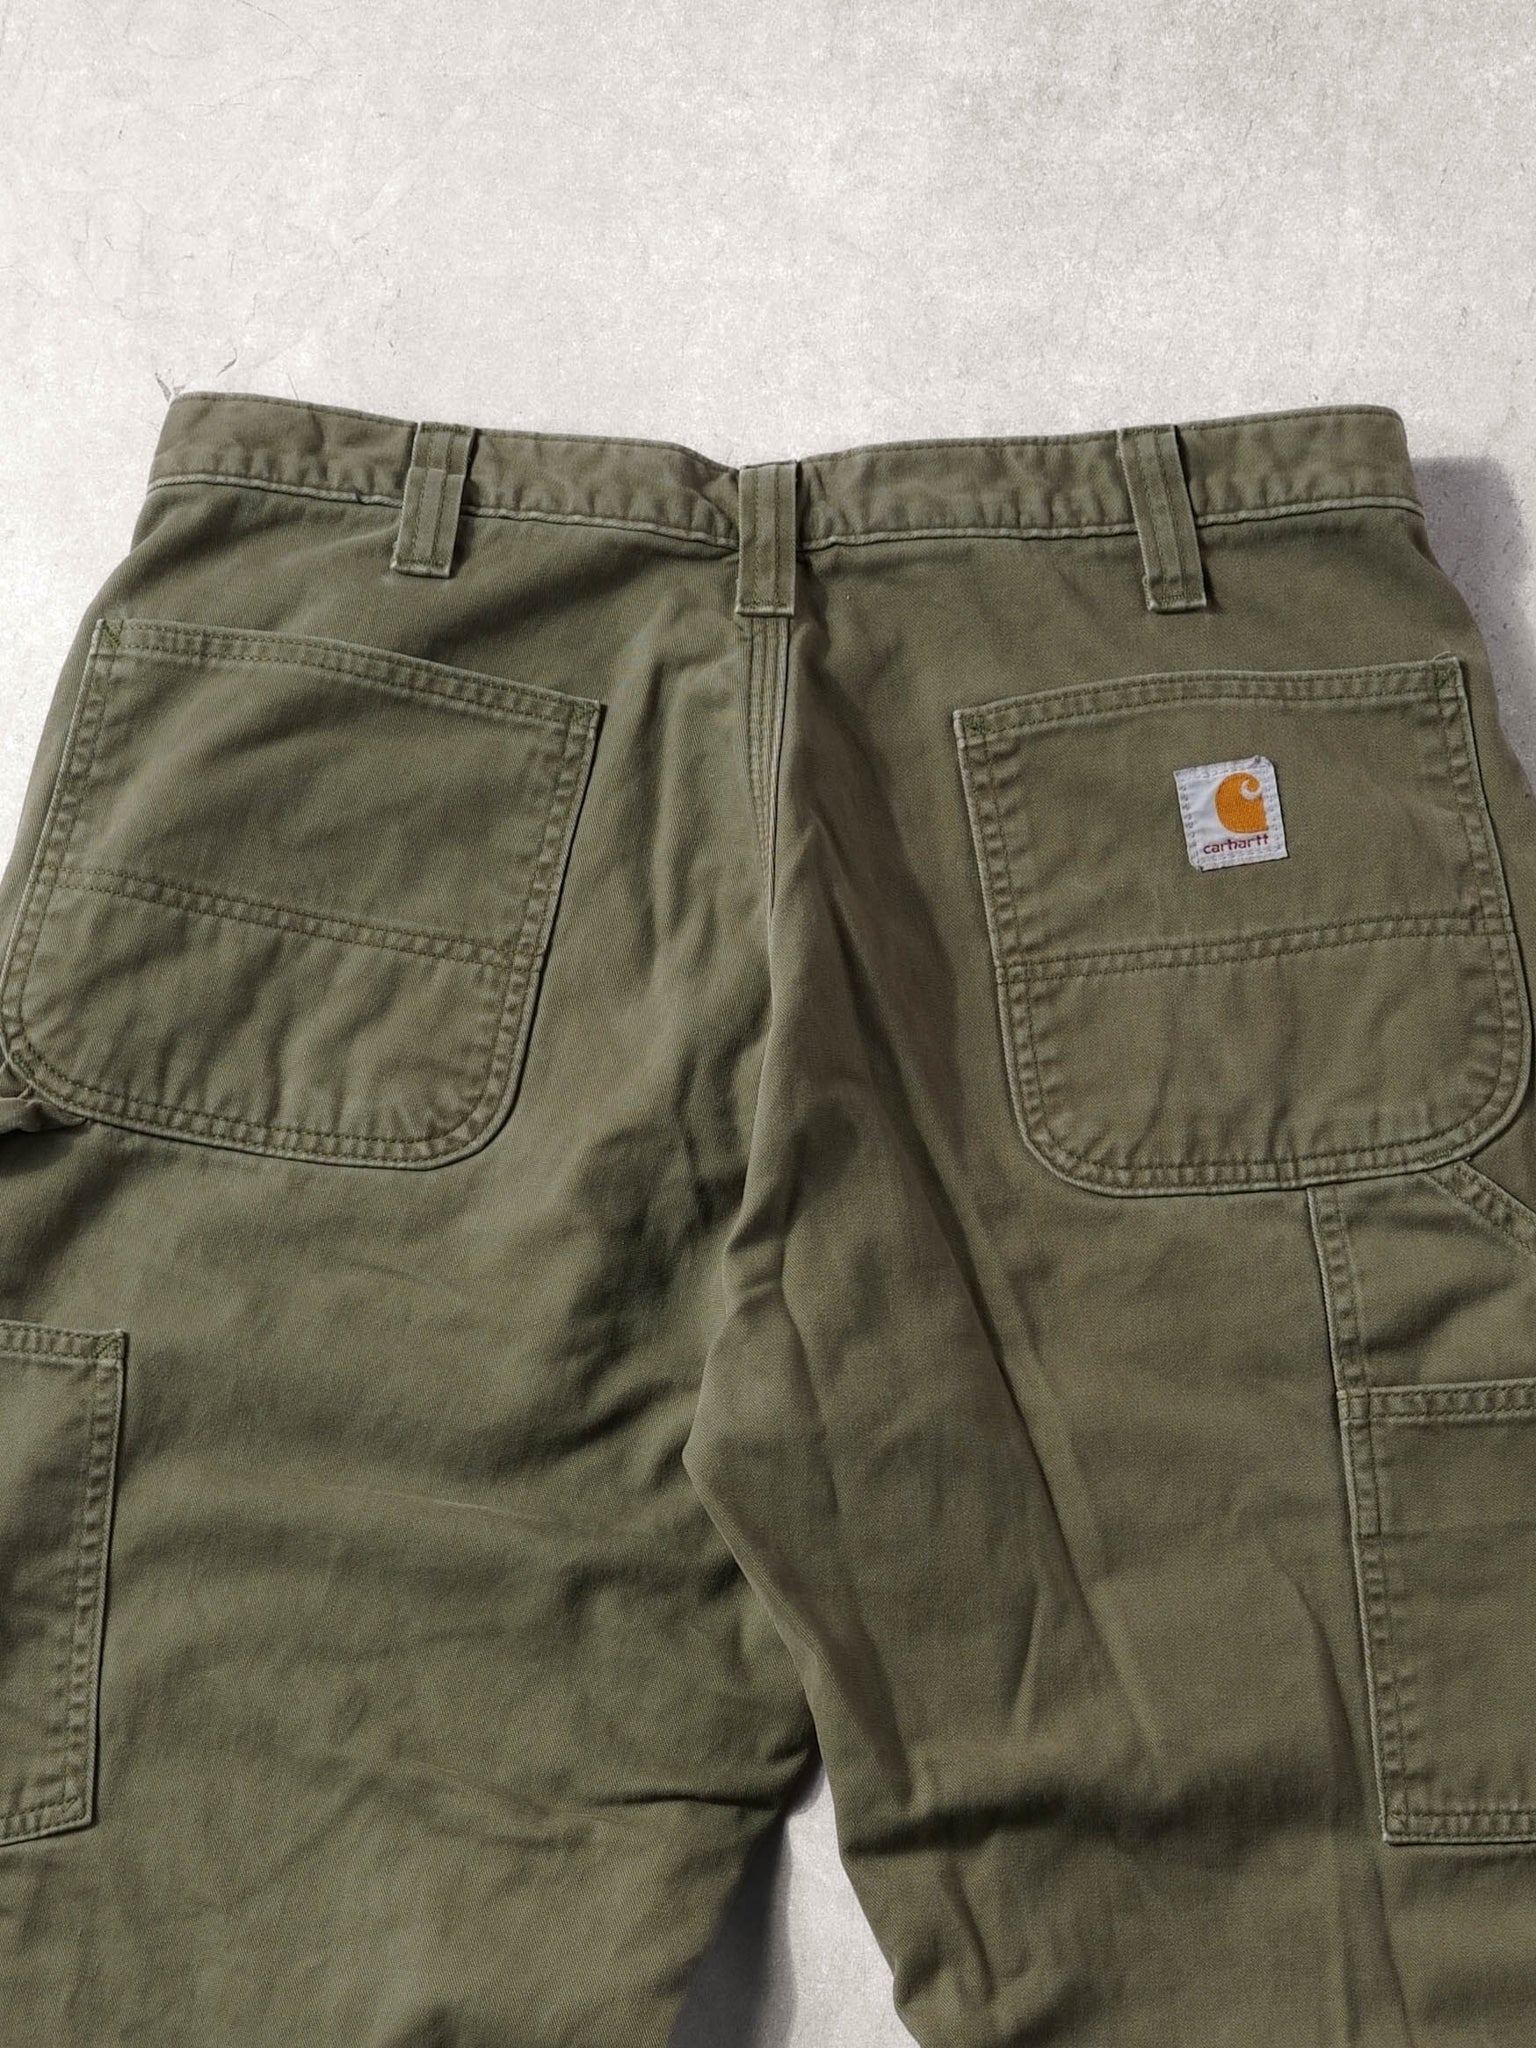 Vintage 90s Juniper Washed Green Carhartt Relax Fit Carpenter Lined Pants (34x30)